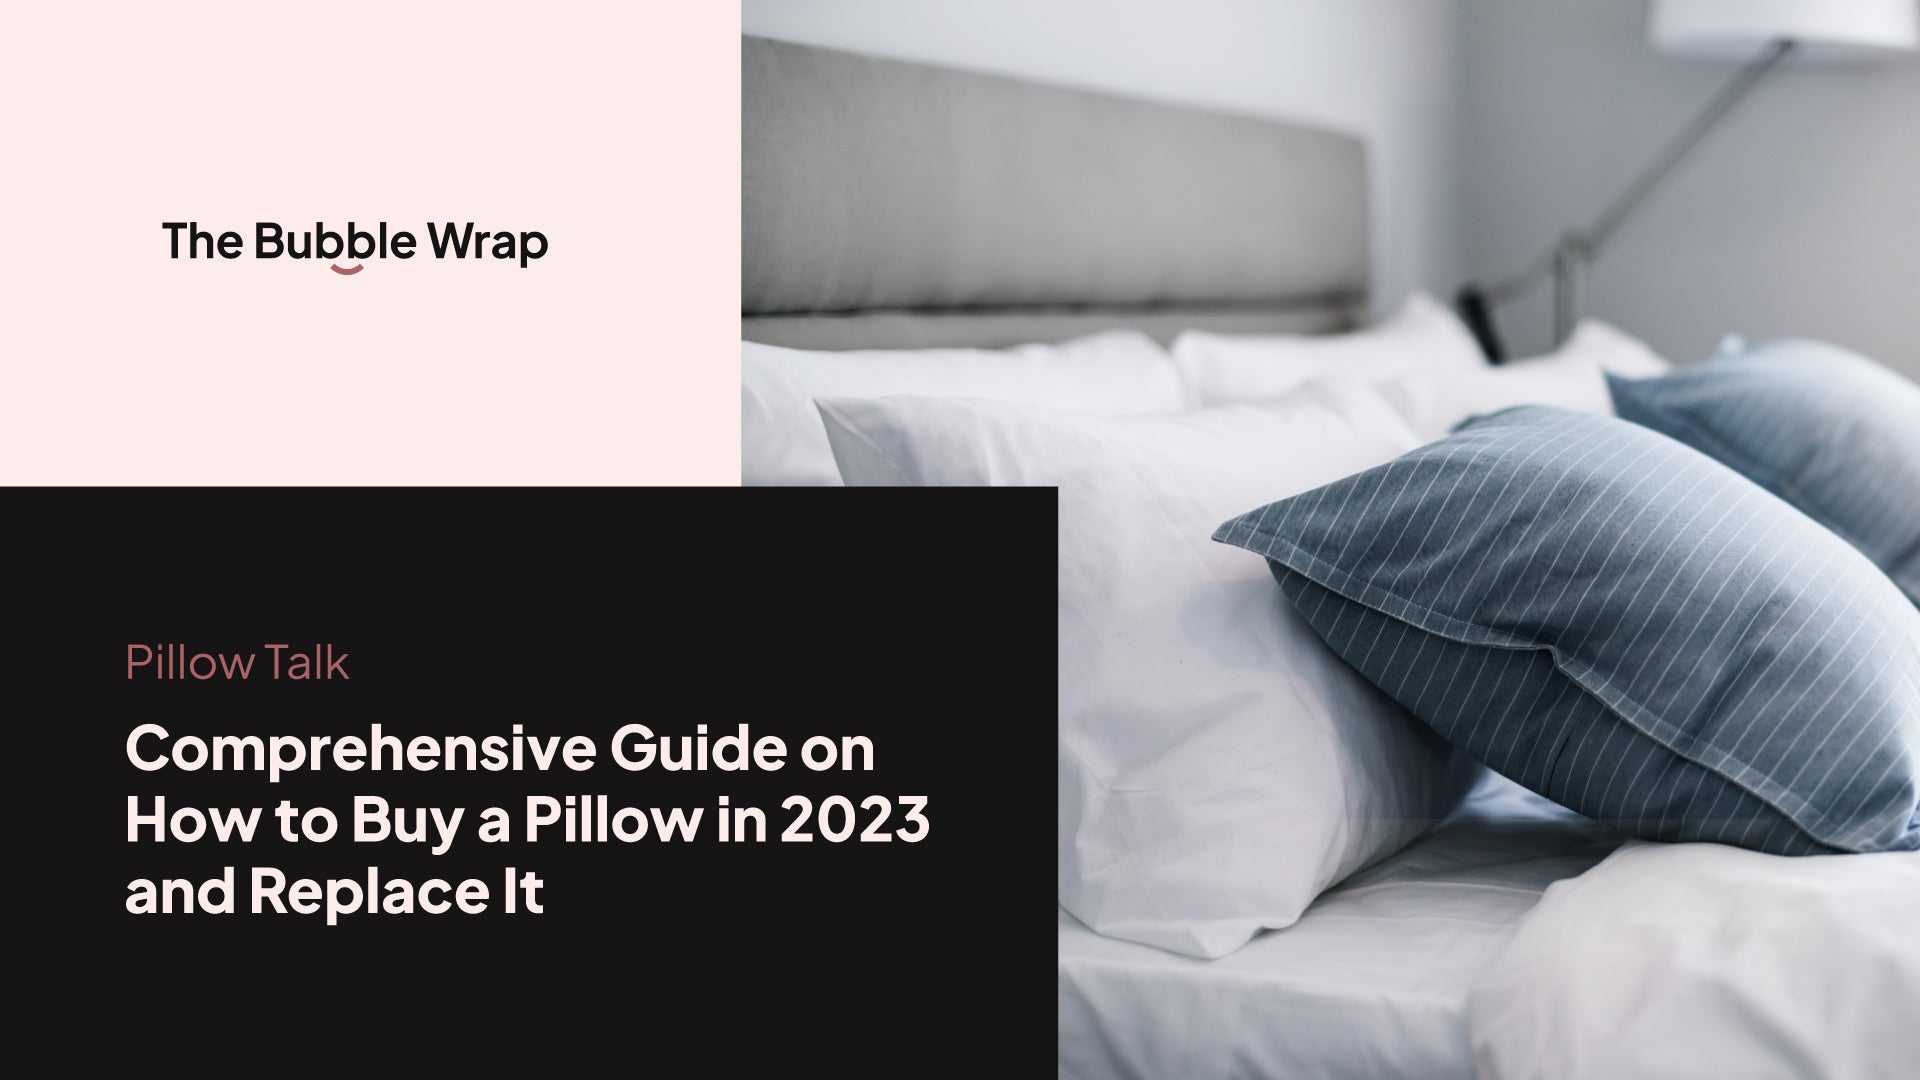 Pillow Talk: Comprehensive Guide on How to Buy a Pillow in 2023 and Replace It